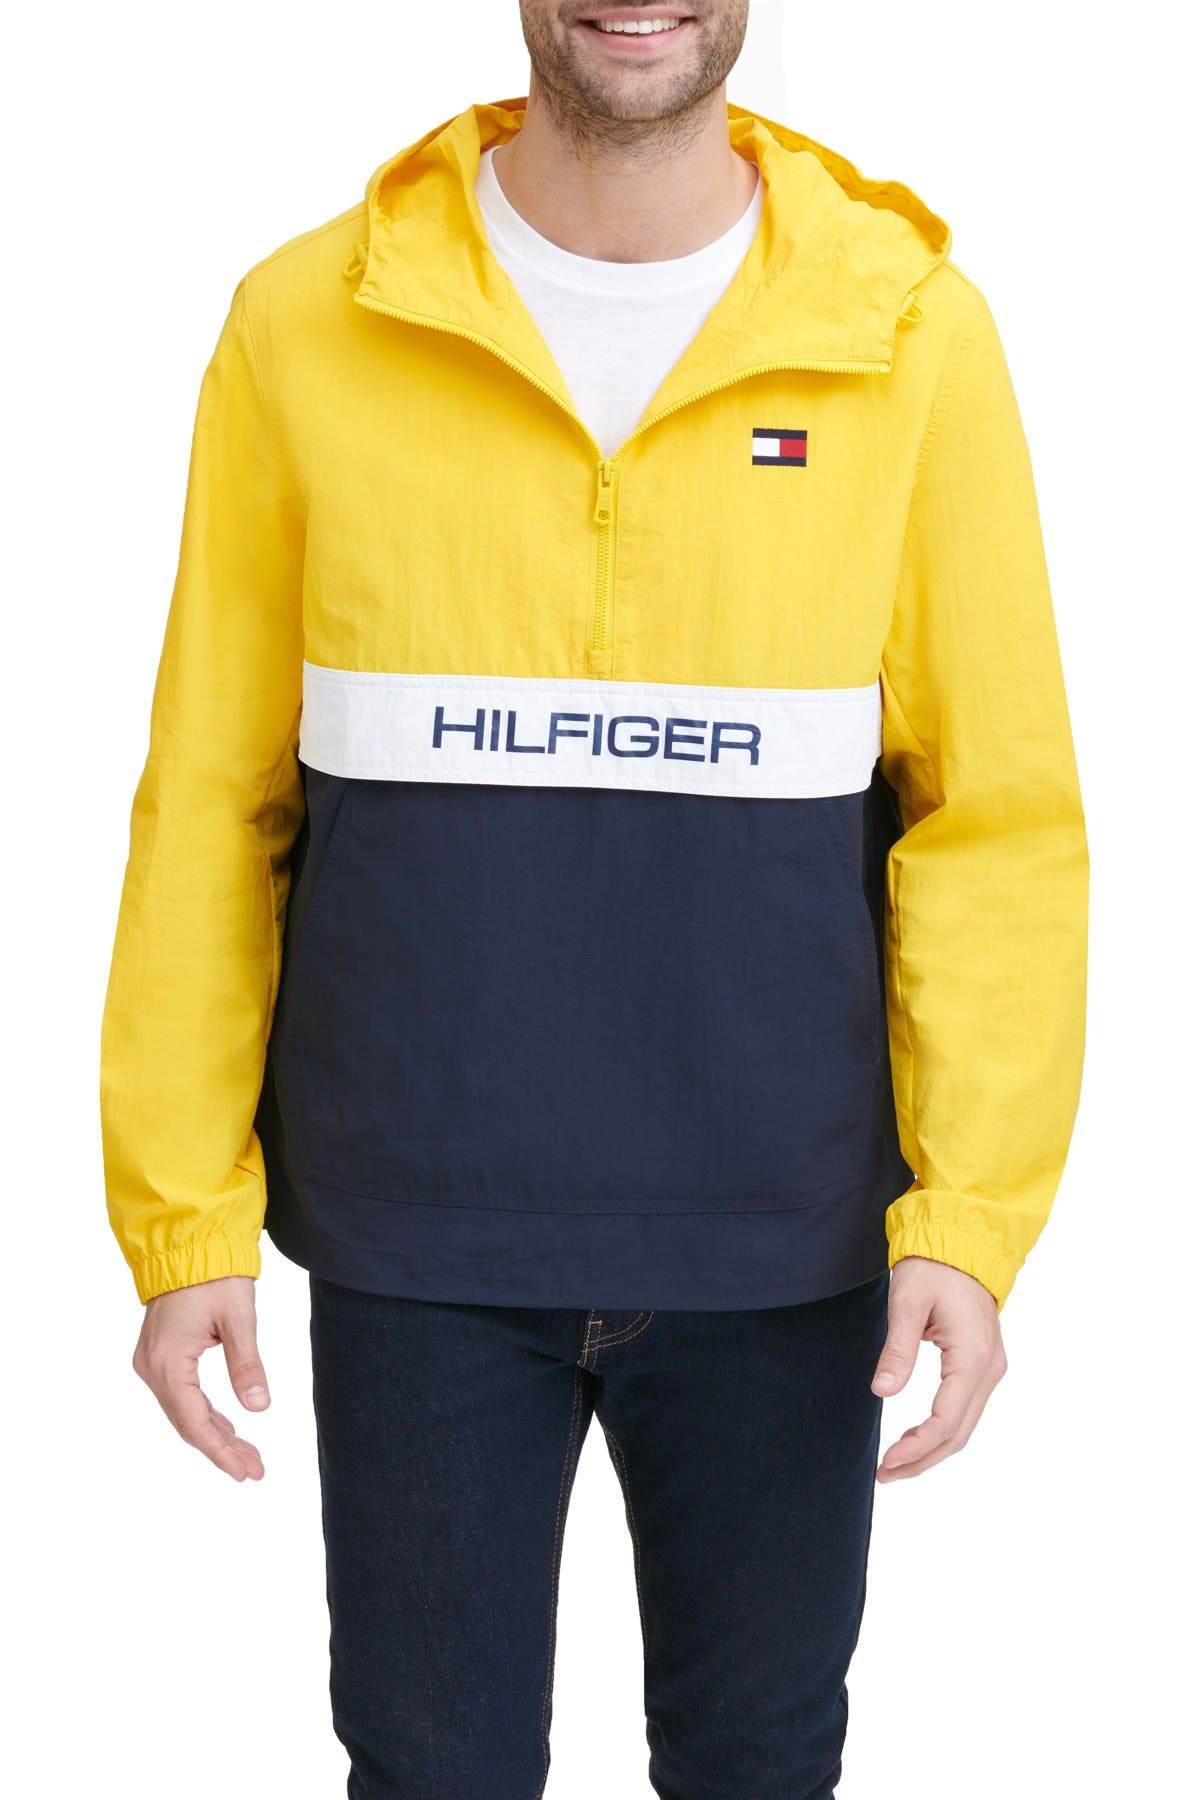 tommy hilfiger water and wind resistant jacket